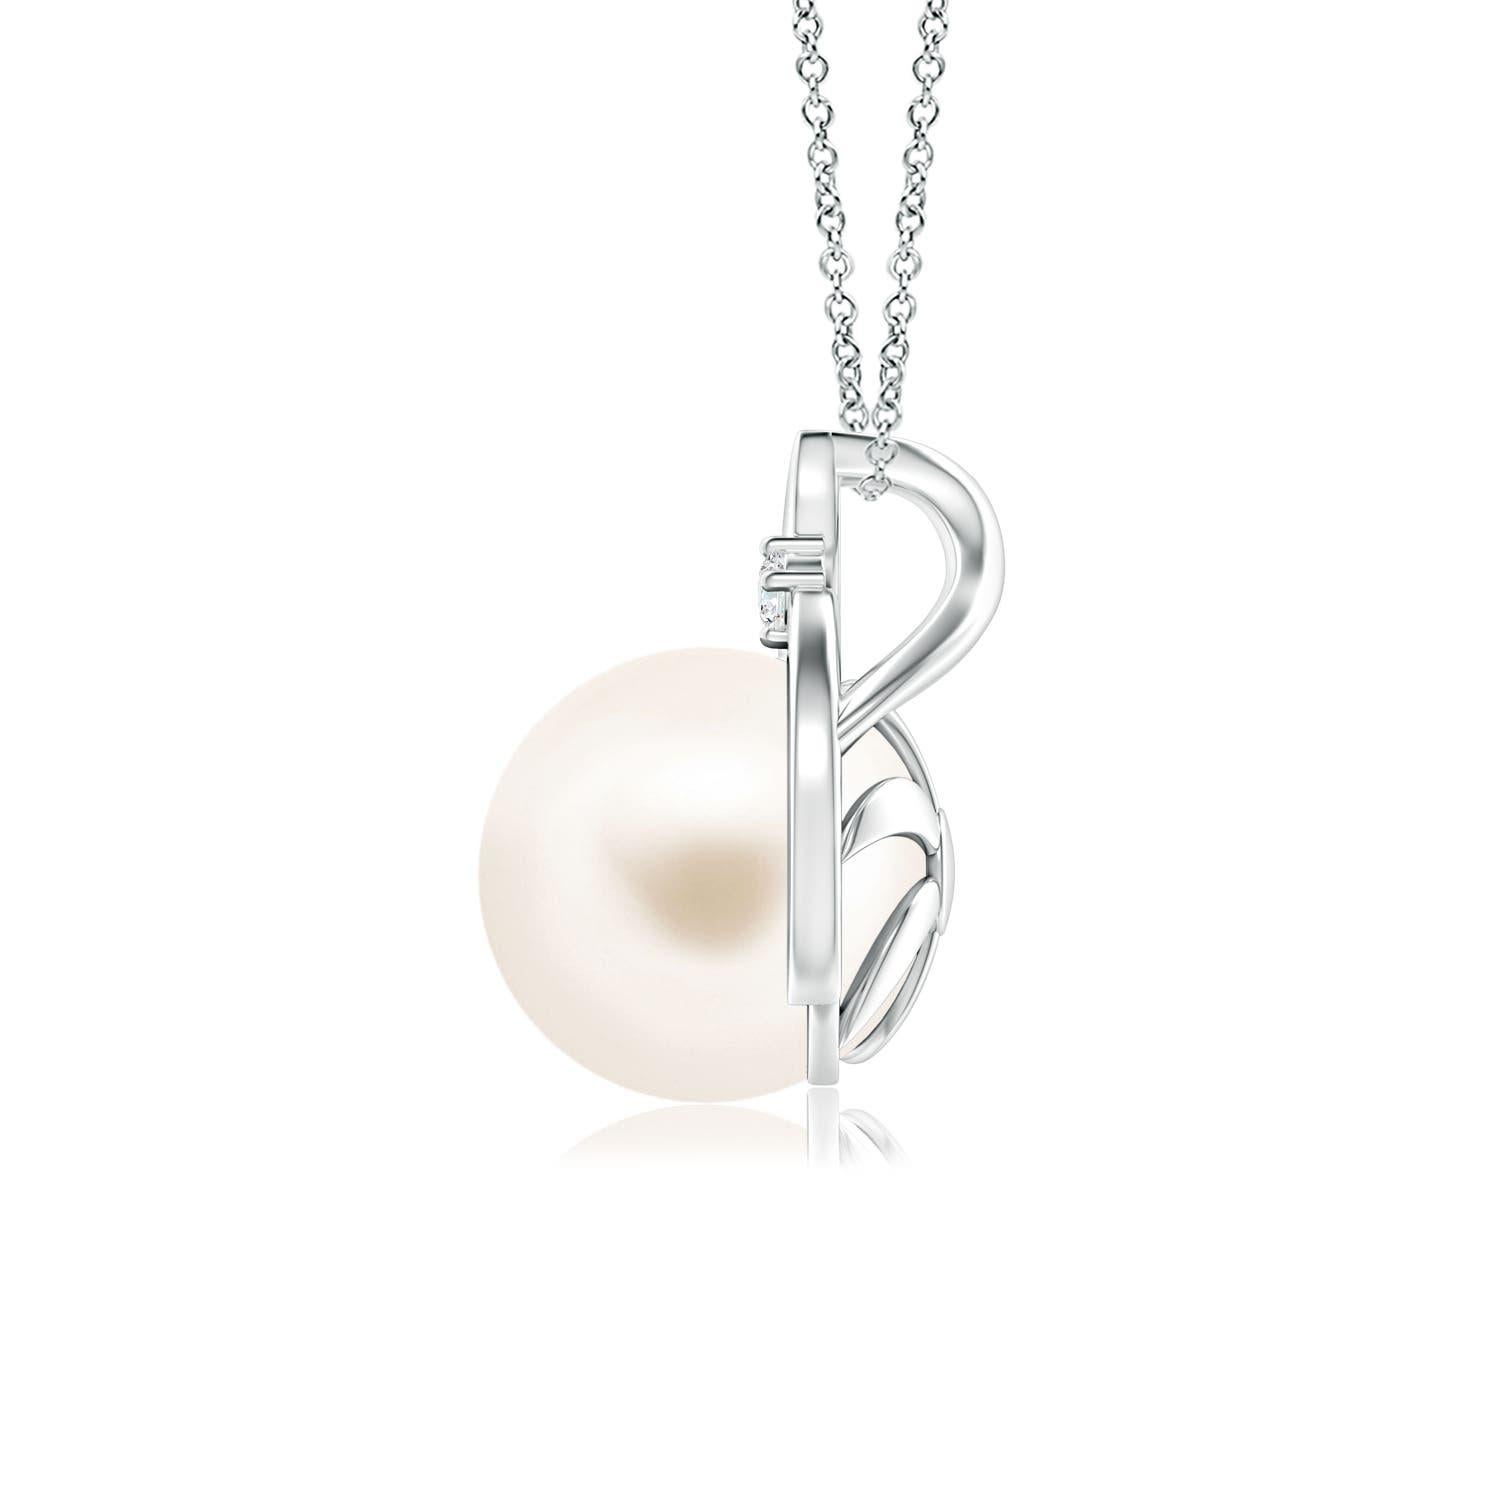 A modern take on the vintage wishbone pattern, this pearl pendant necklace in 14K white gold is designed to evoke an old-world charm. The intricately set Freshwater cultured pearl looks breathtakingly beautiful. Uniquely designed bale lends a touch